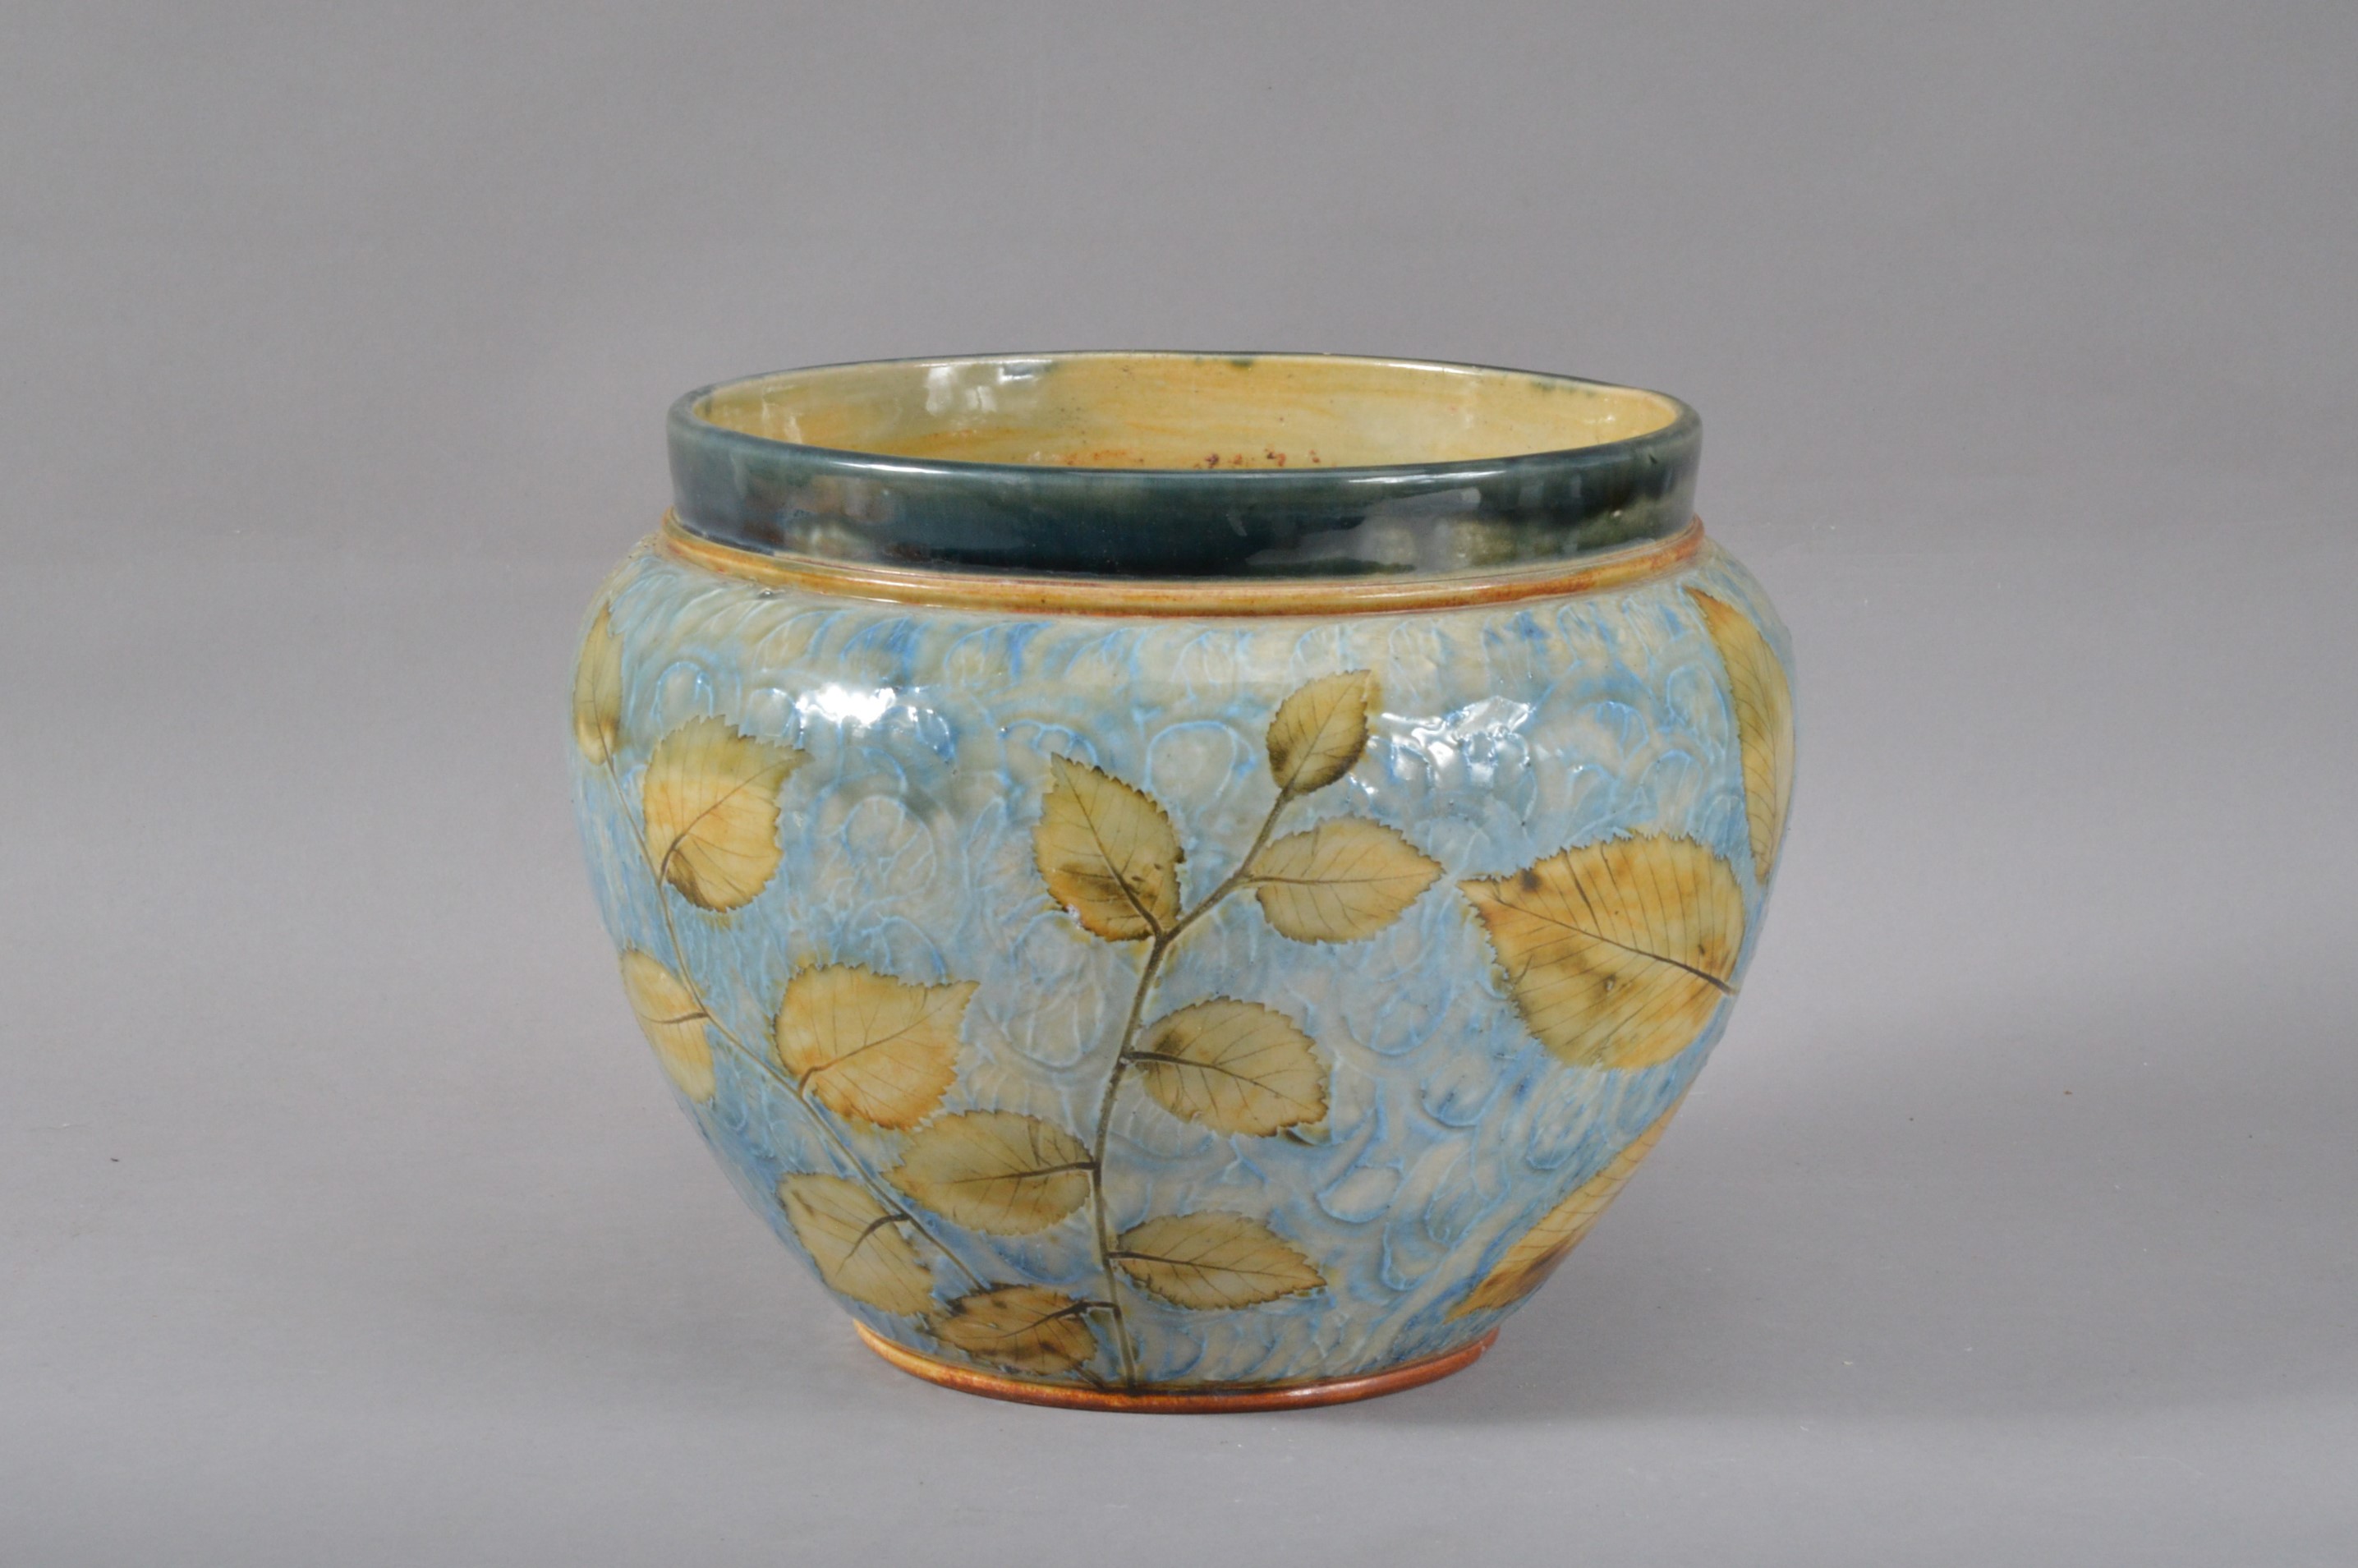 A Royal Doulton stoneware planter/ jardiniere, with a floral design on a light blue ground, dark